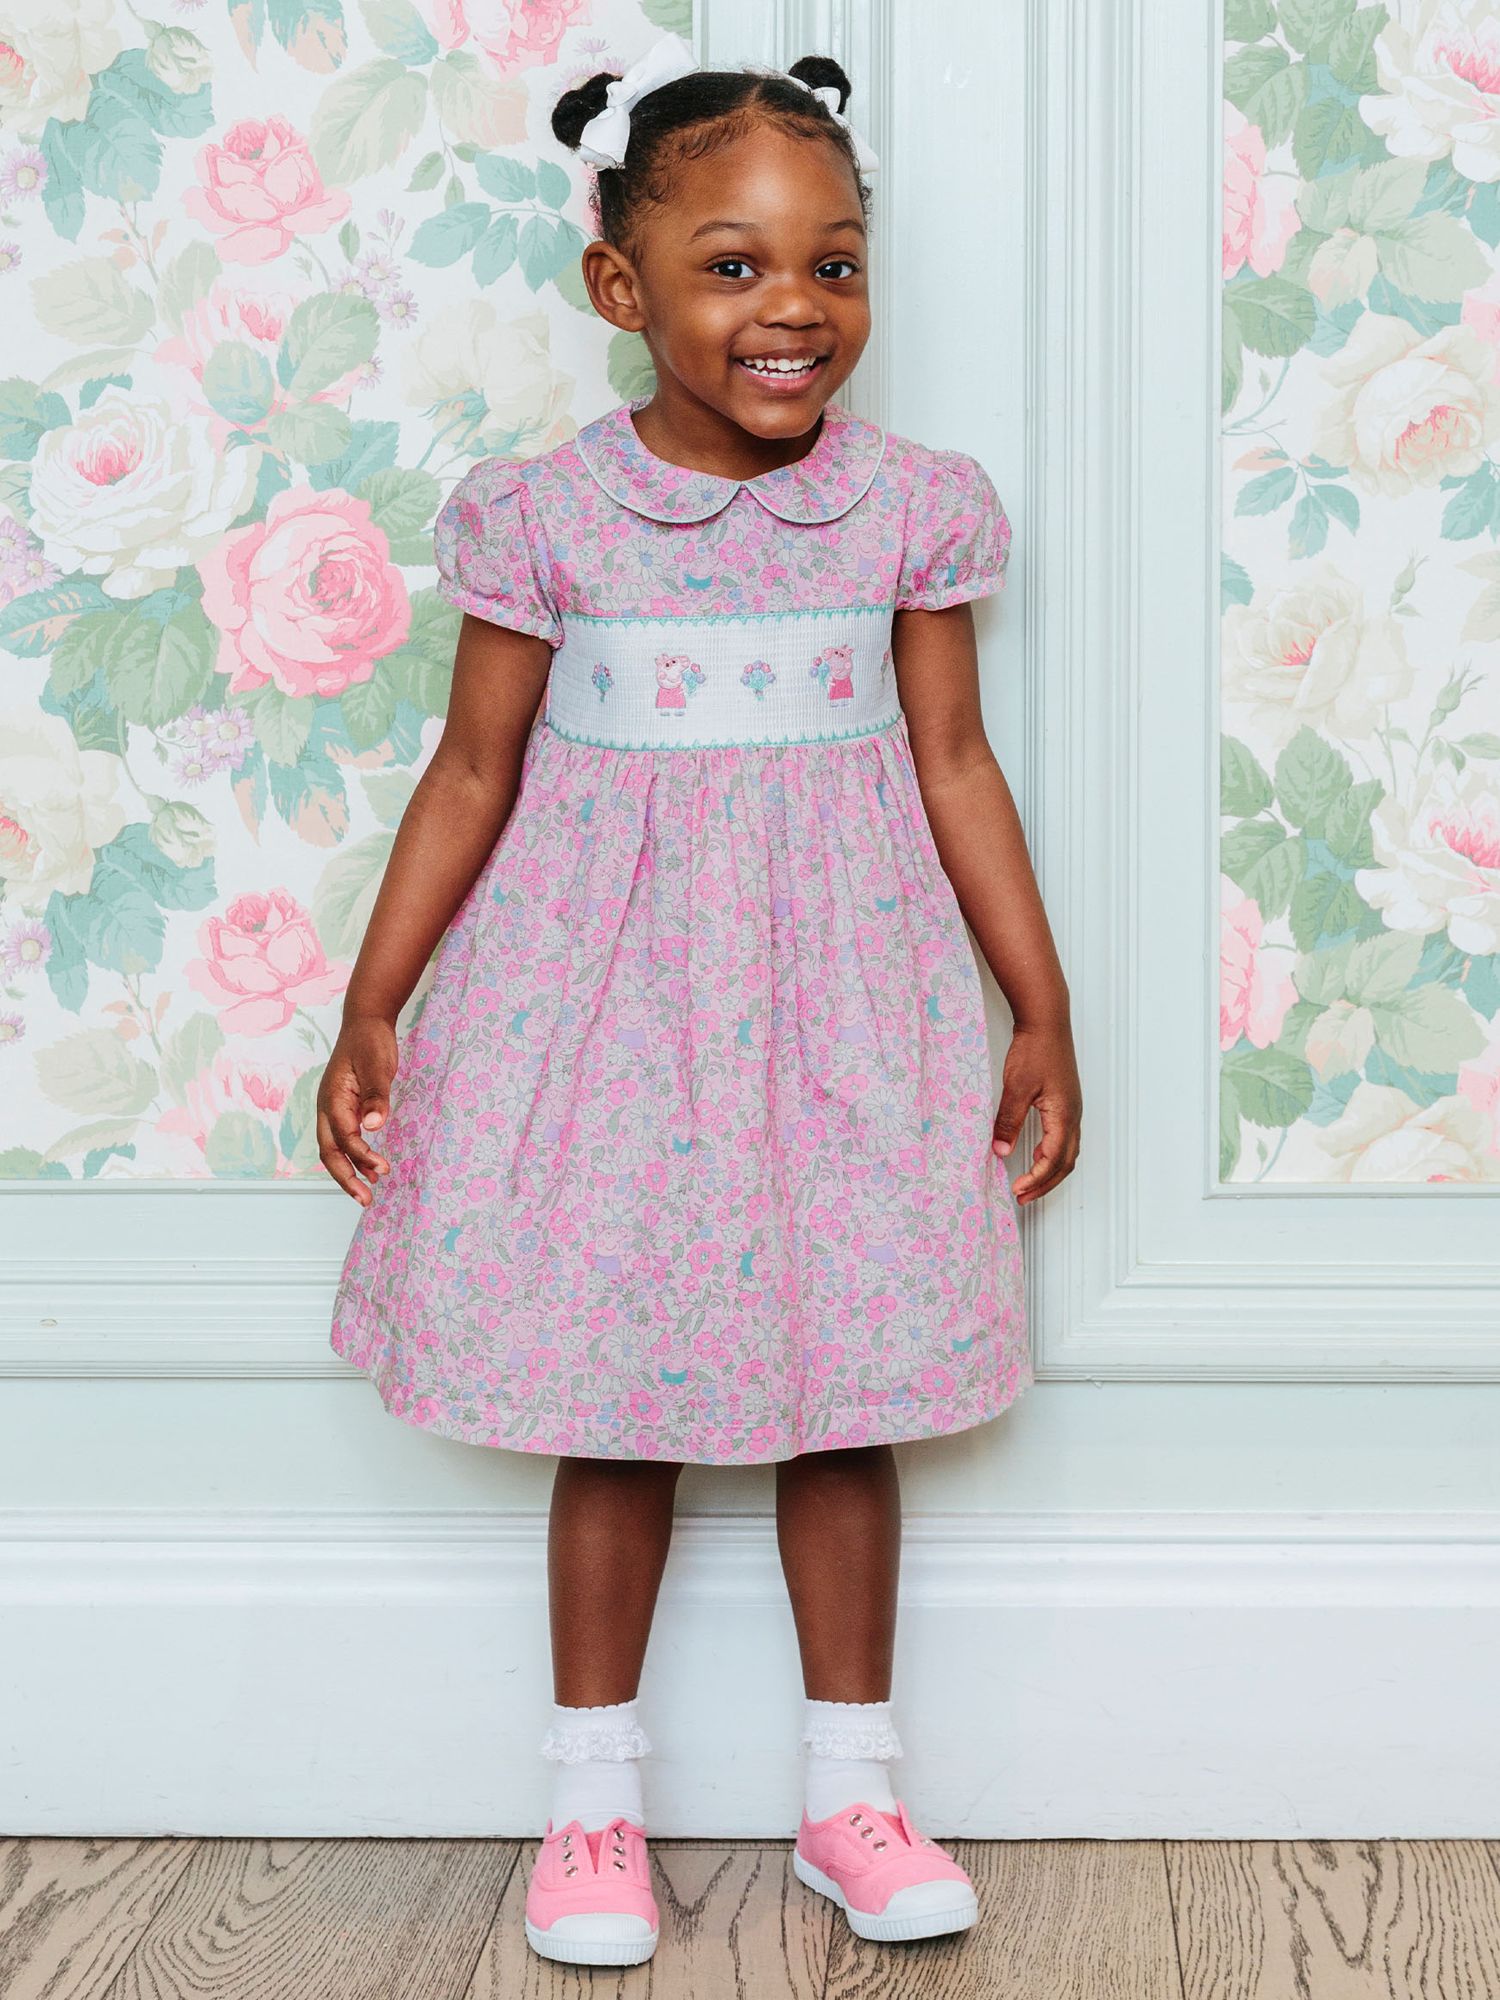 Buy Trotters Kids' Peppa Pig Meadow Liberty Print Smock Party Dress, Pink/White Online at johnlewis.com